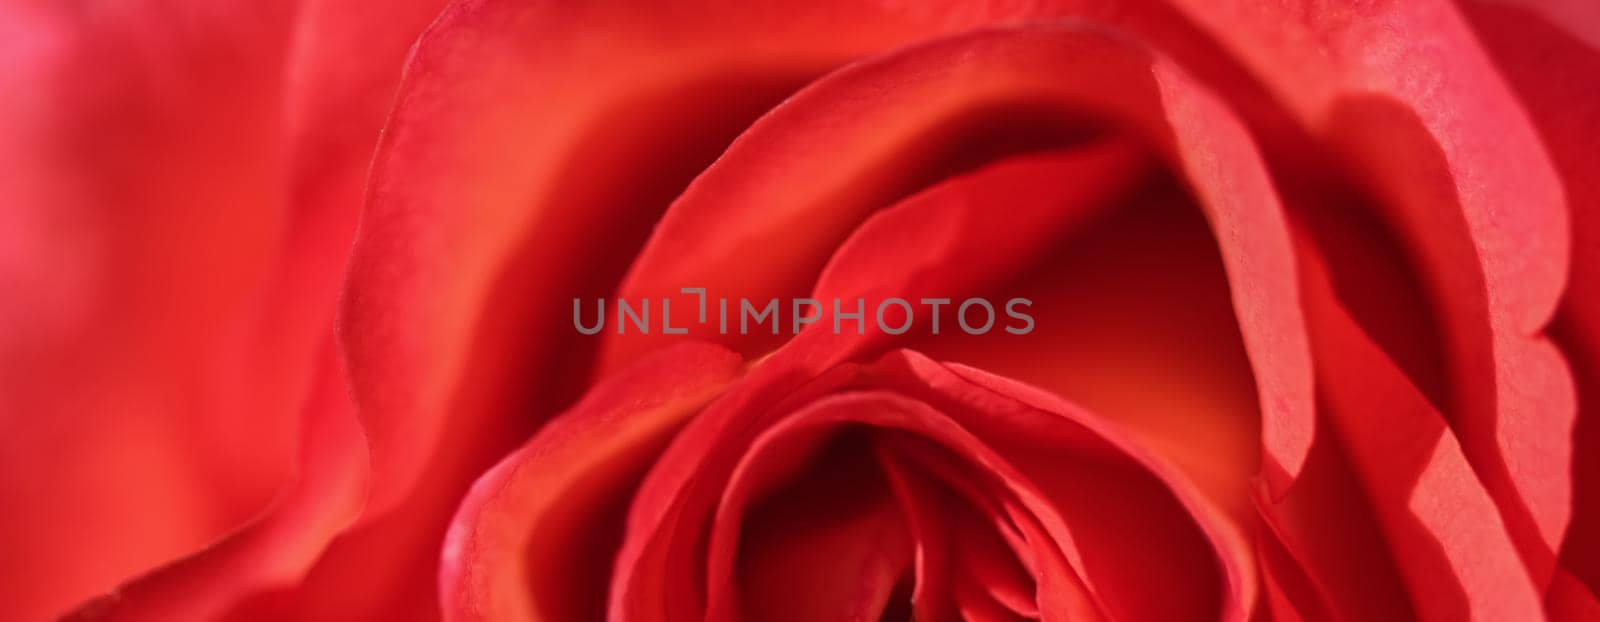 Botanical concept, invitation card - Soft focus, abstract floral background, red rose flower. Macro flowers backdrop for holiday design